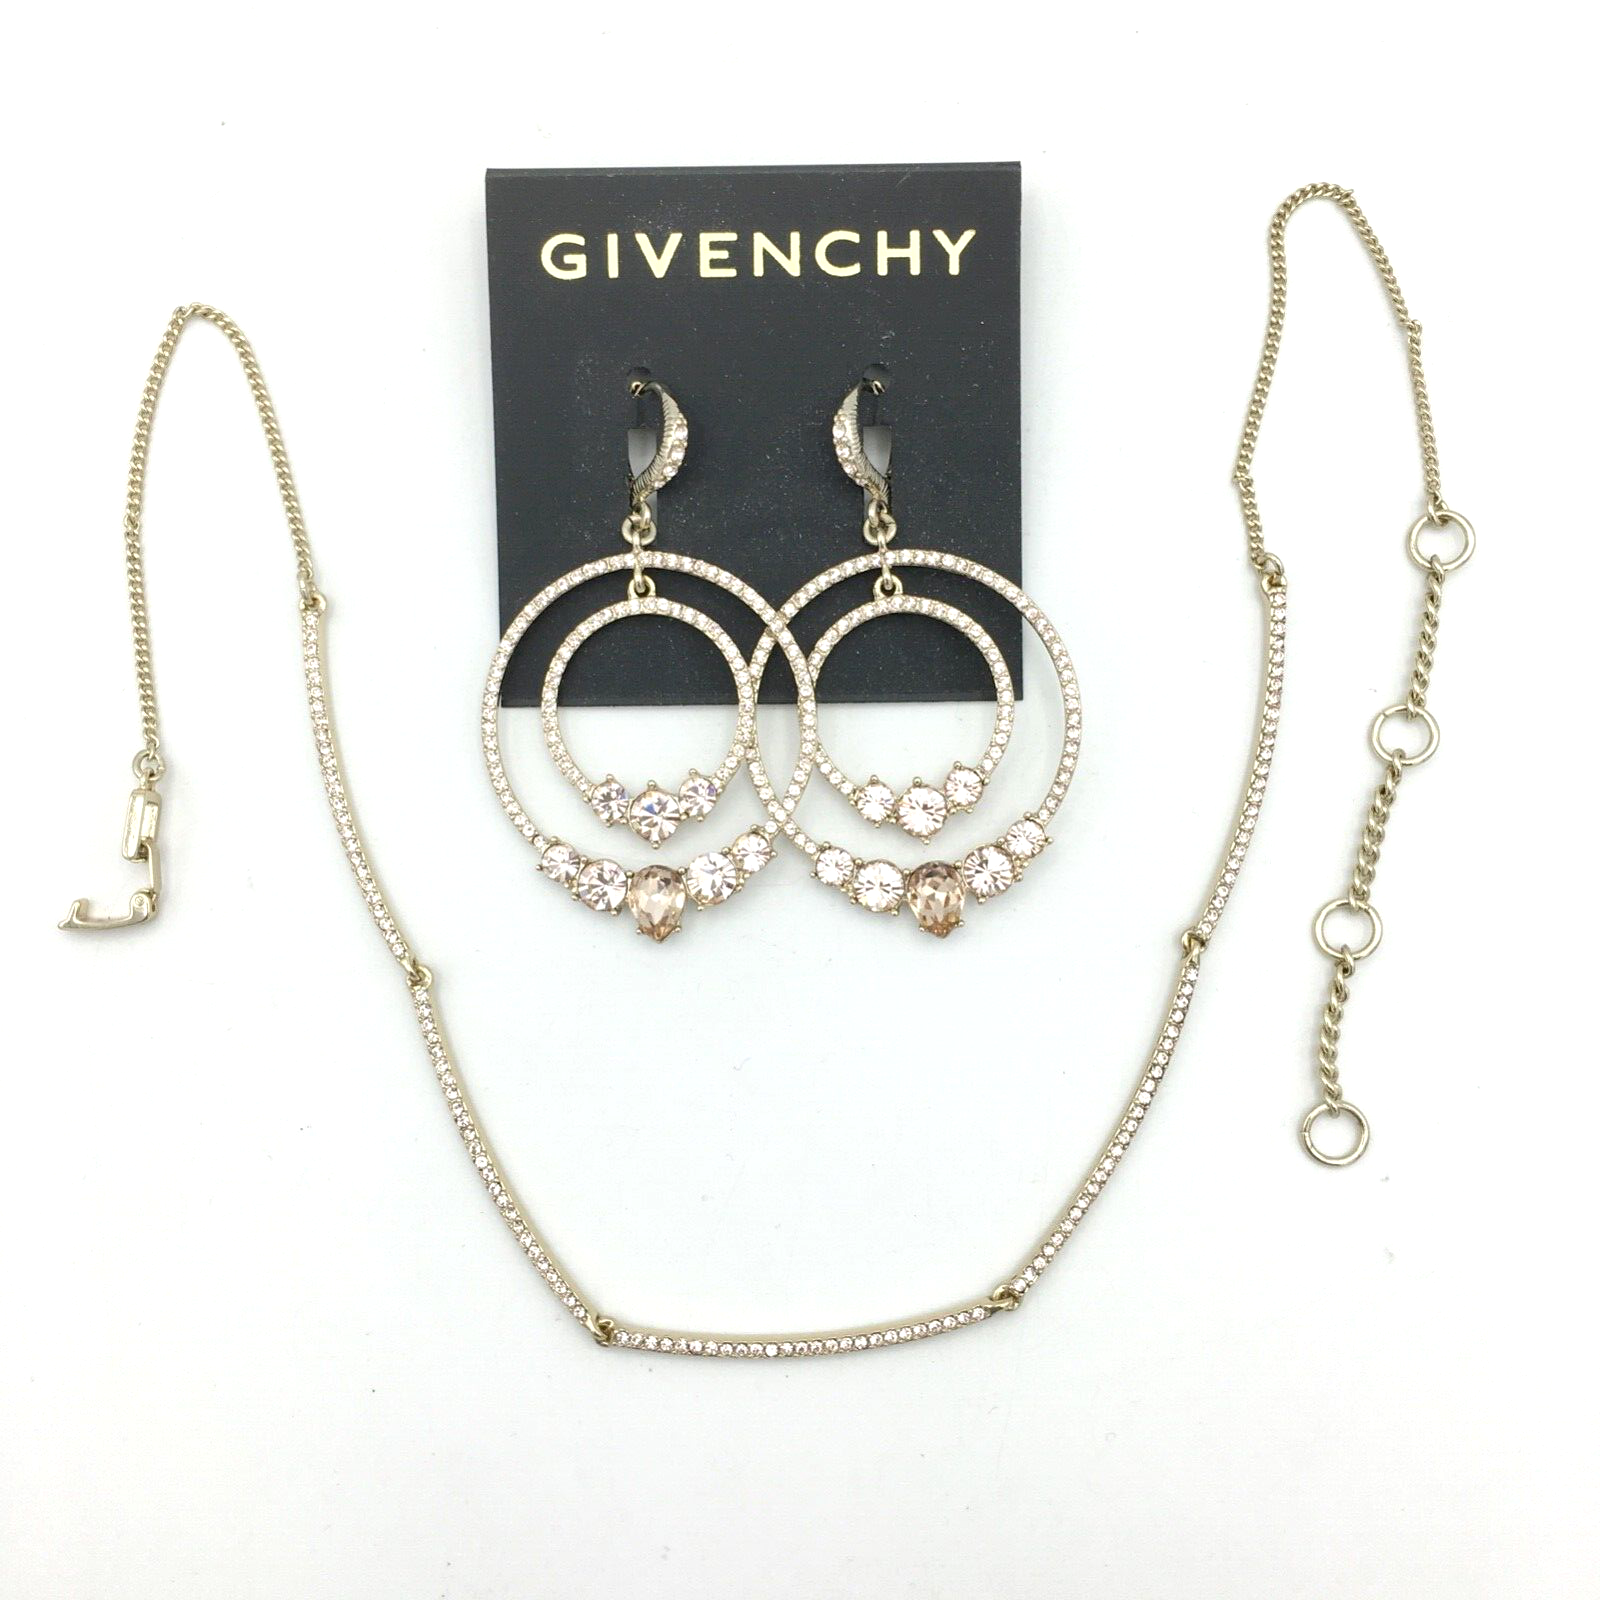 GIVENCHY peachy pink crystal dangle earrings & choker necklace set - gold-tone - $40.00